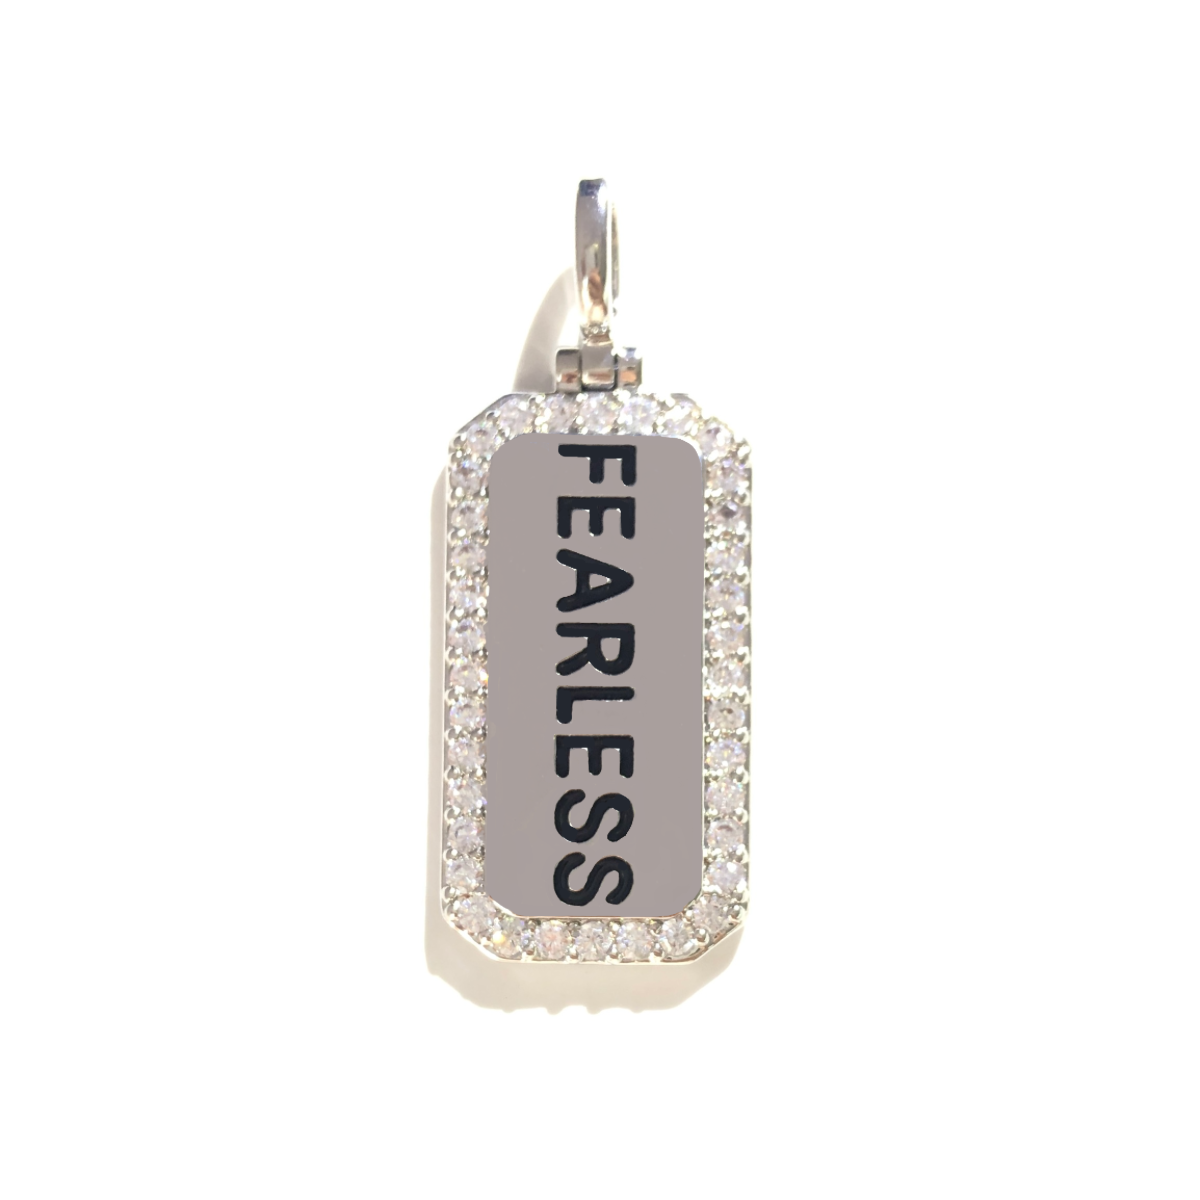 10pcs/lot 38*15mm CZ Paved Fearless Word Tags Charms Pendants Silver CZ Paved Charms Christian Quotes New Charms Arrivals Word Tags Charms Beads Beyond